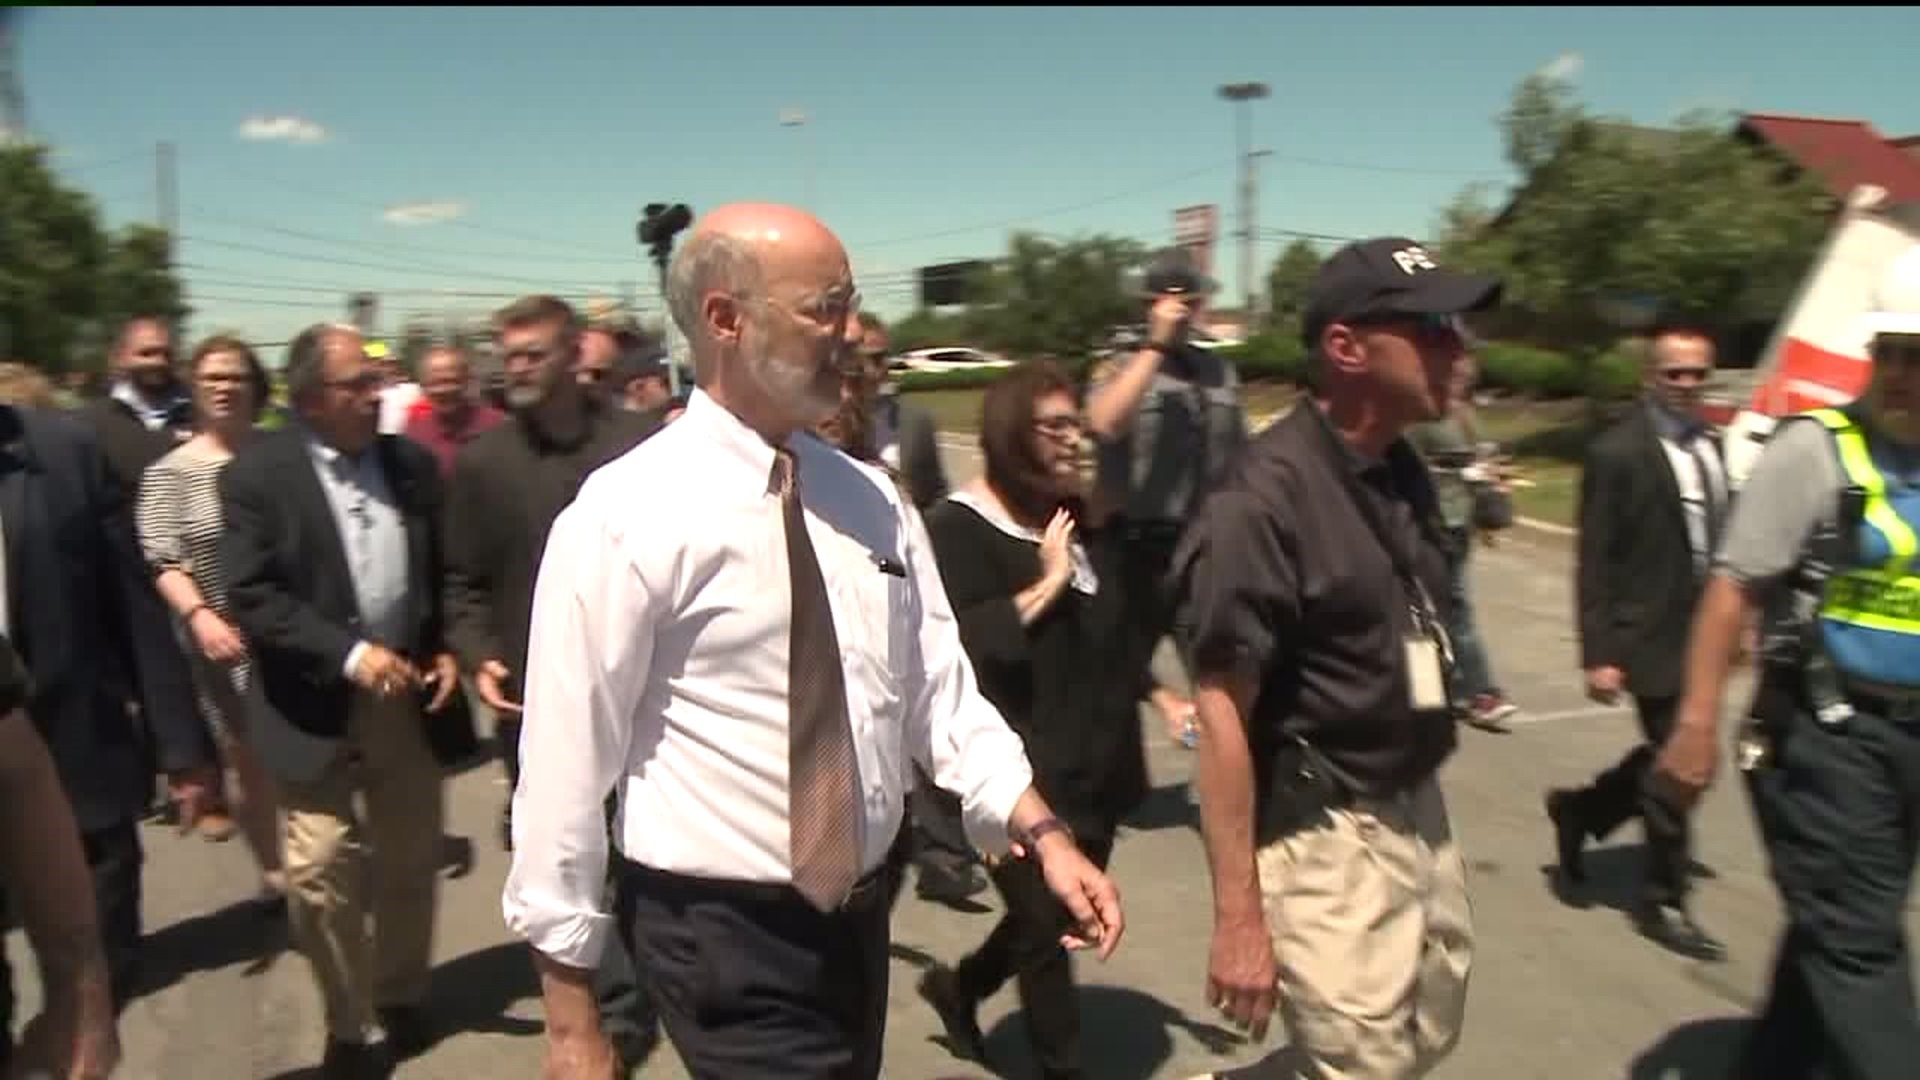 Governor Tours Tornado Damage in Luzerne County